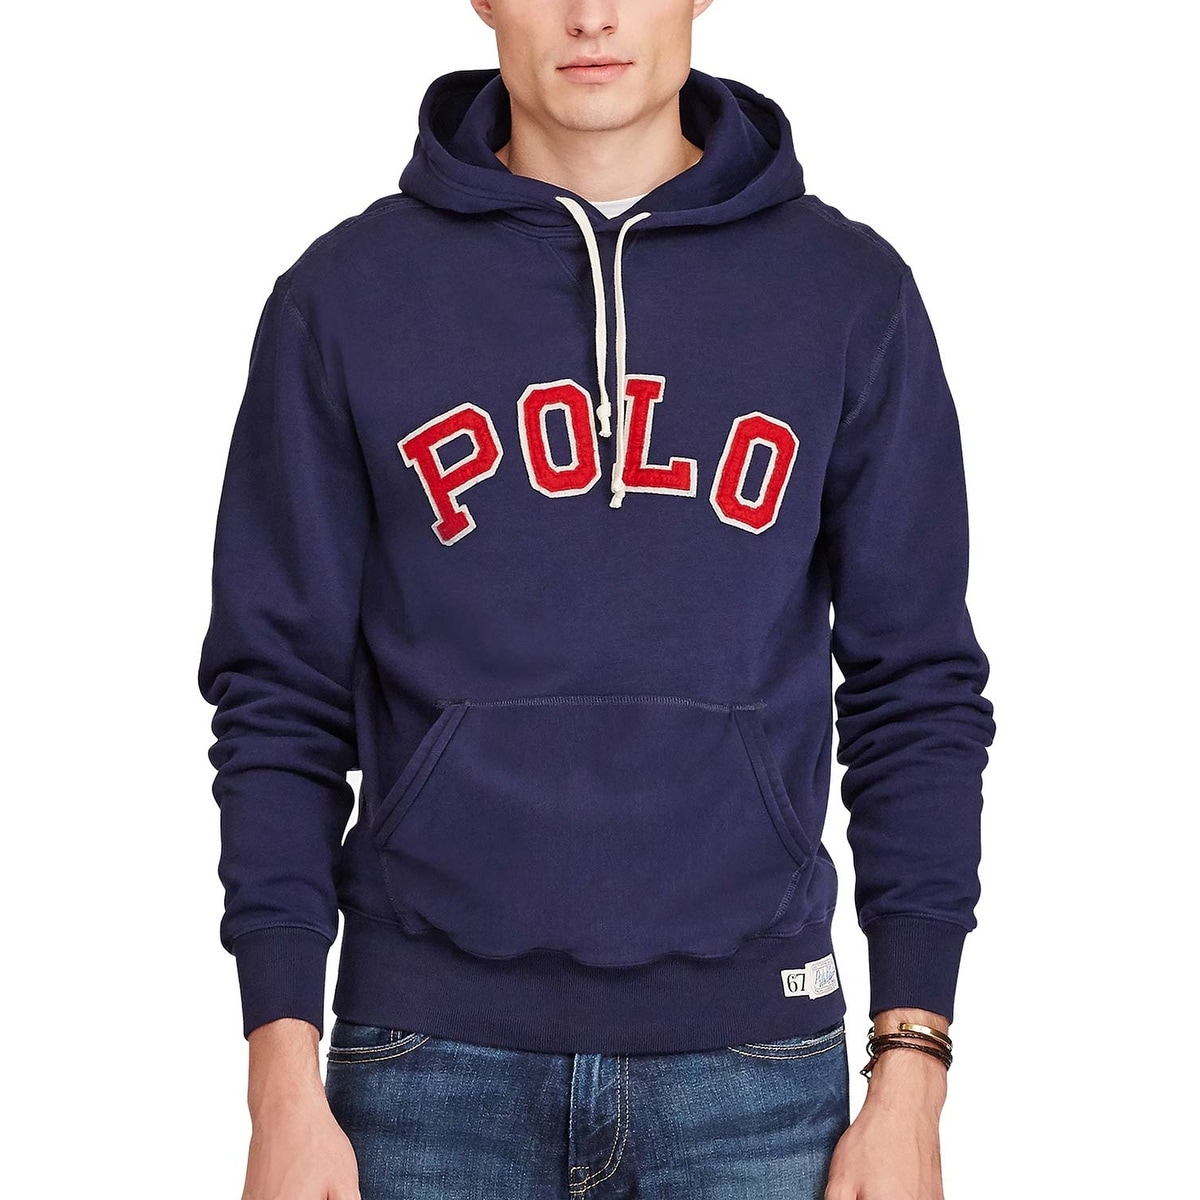 navy blue and red polo hoodie